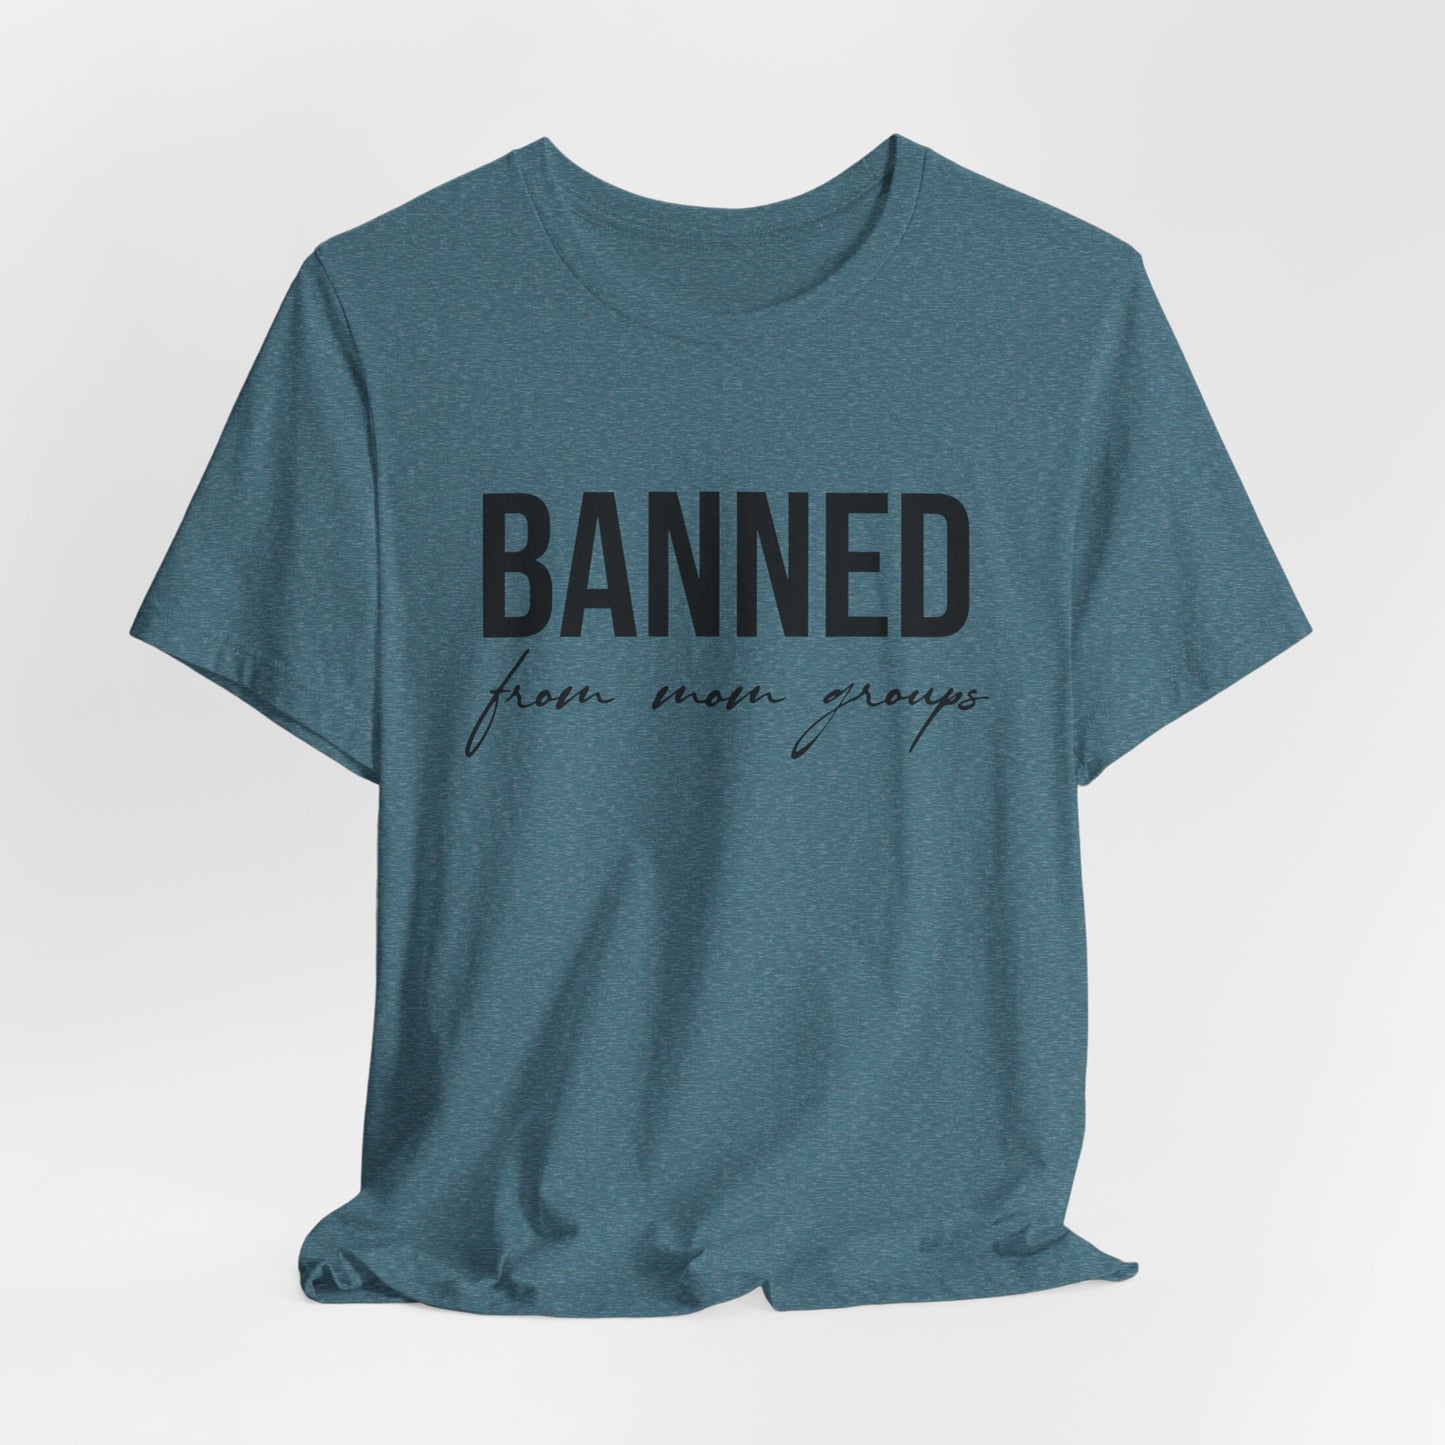 Banned From Mom Groups Funny Women's Short Sleeve Tee